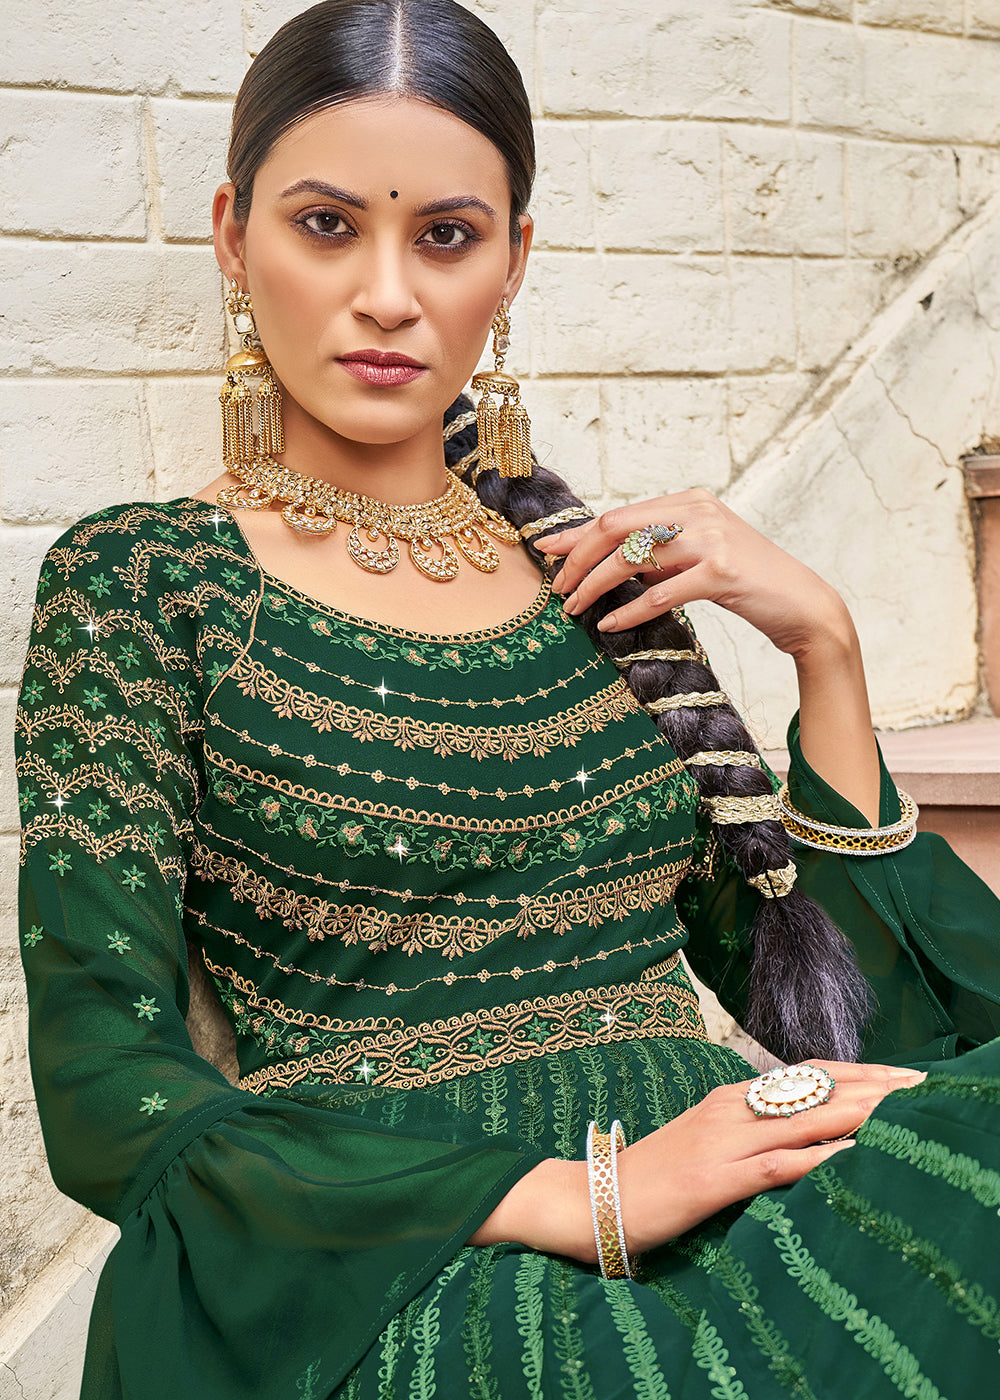 Buy Now Exquisite Green Georgette Fabric Wedding Wear Anarkali Suit Online in USA, UK, Australia, New Zealand, Canada & Worldwide at Empress Clothing.